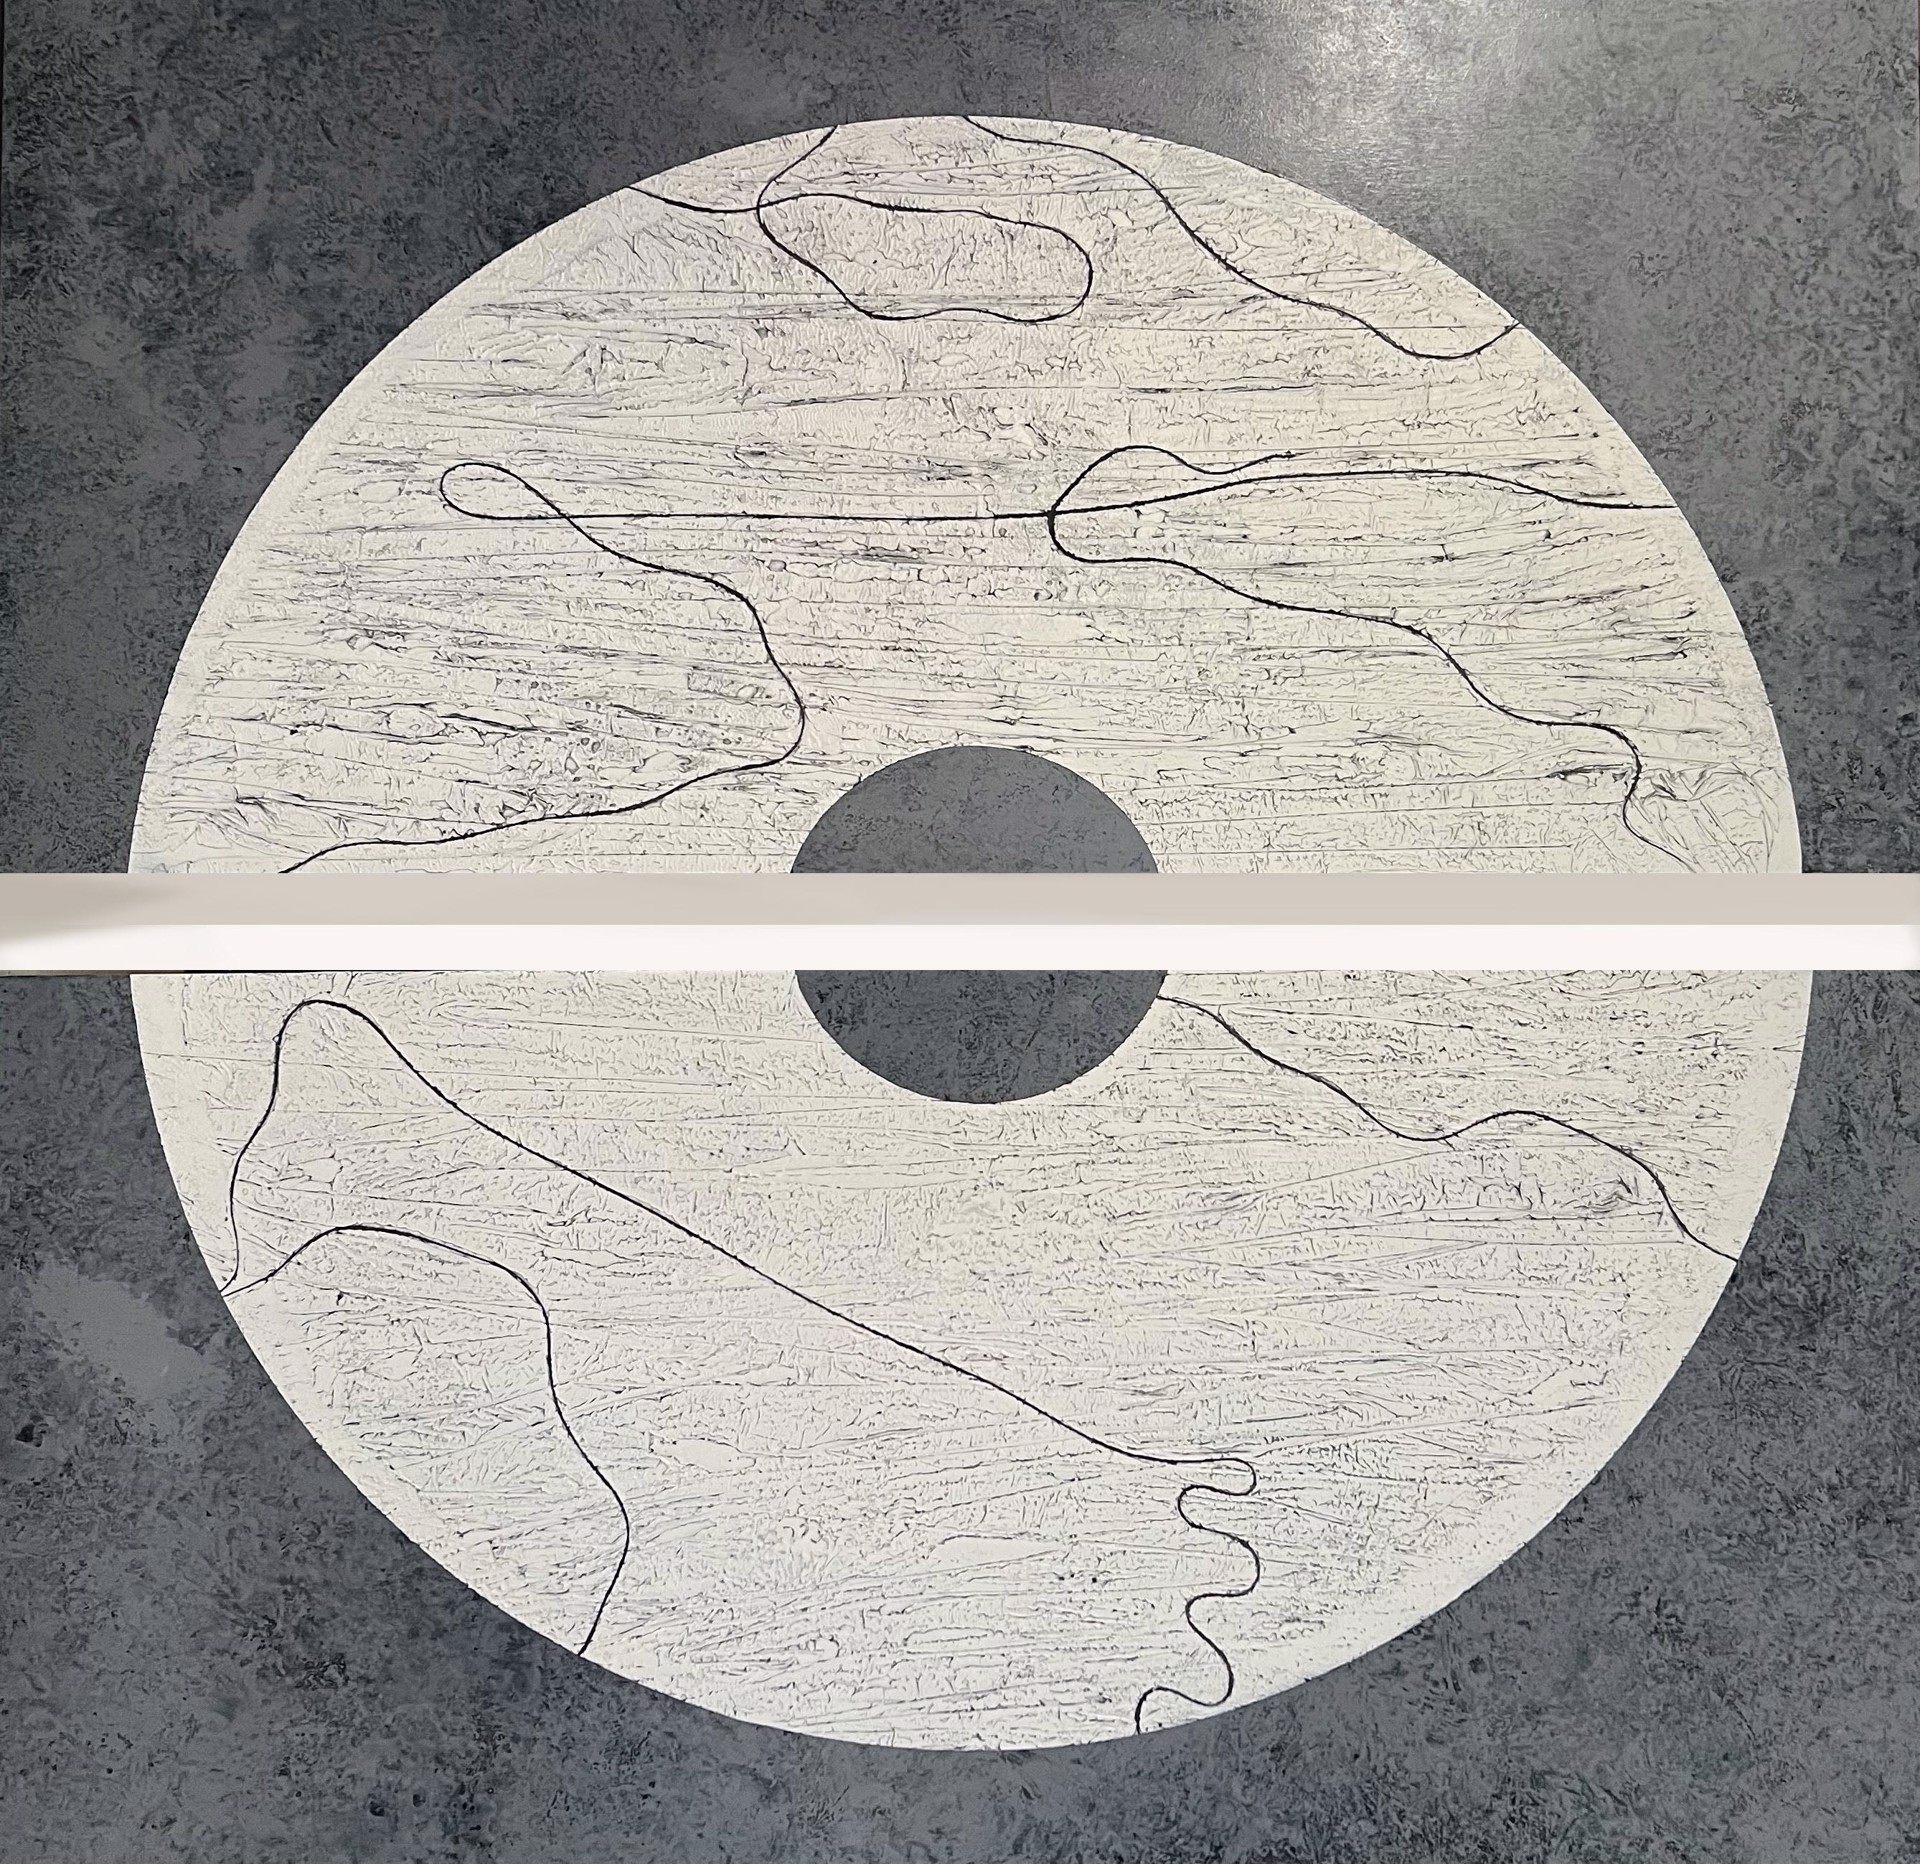 California artist and painter Stephanie Paige's 60"H x 60"W painting Consciousness is a beautiful diptych made of two wood panels with layers of grey marble plaster paint and features a white circle with gray striations and lines. 